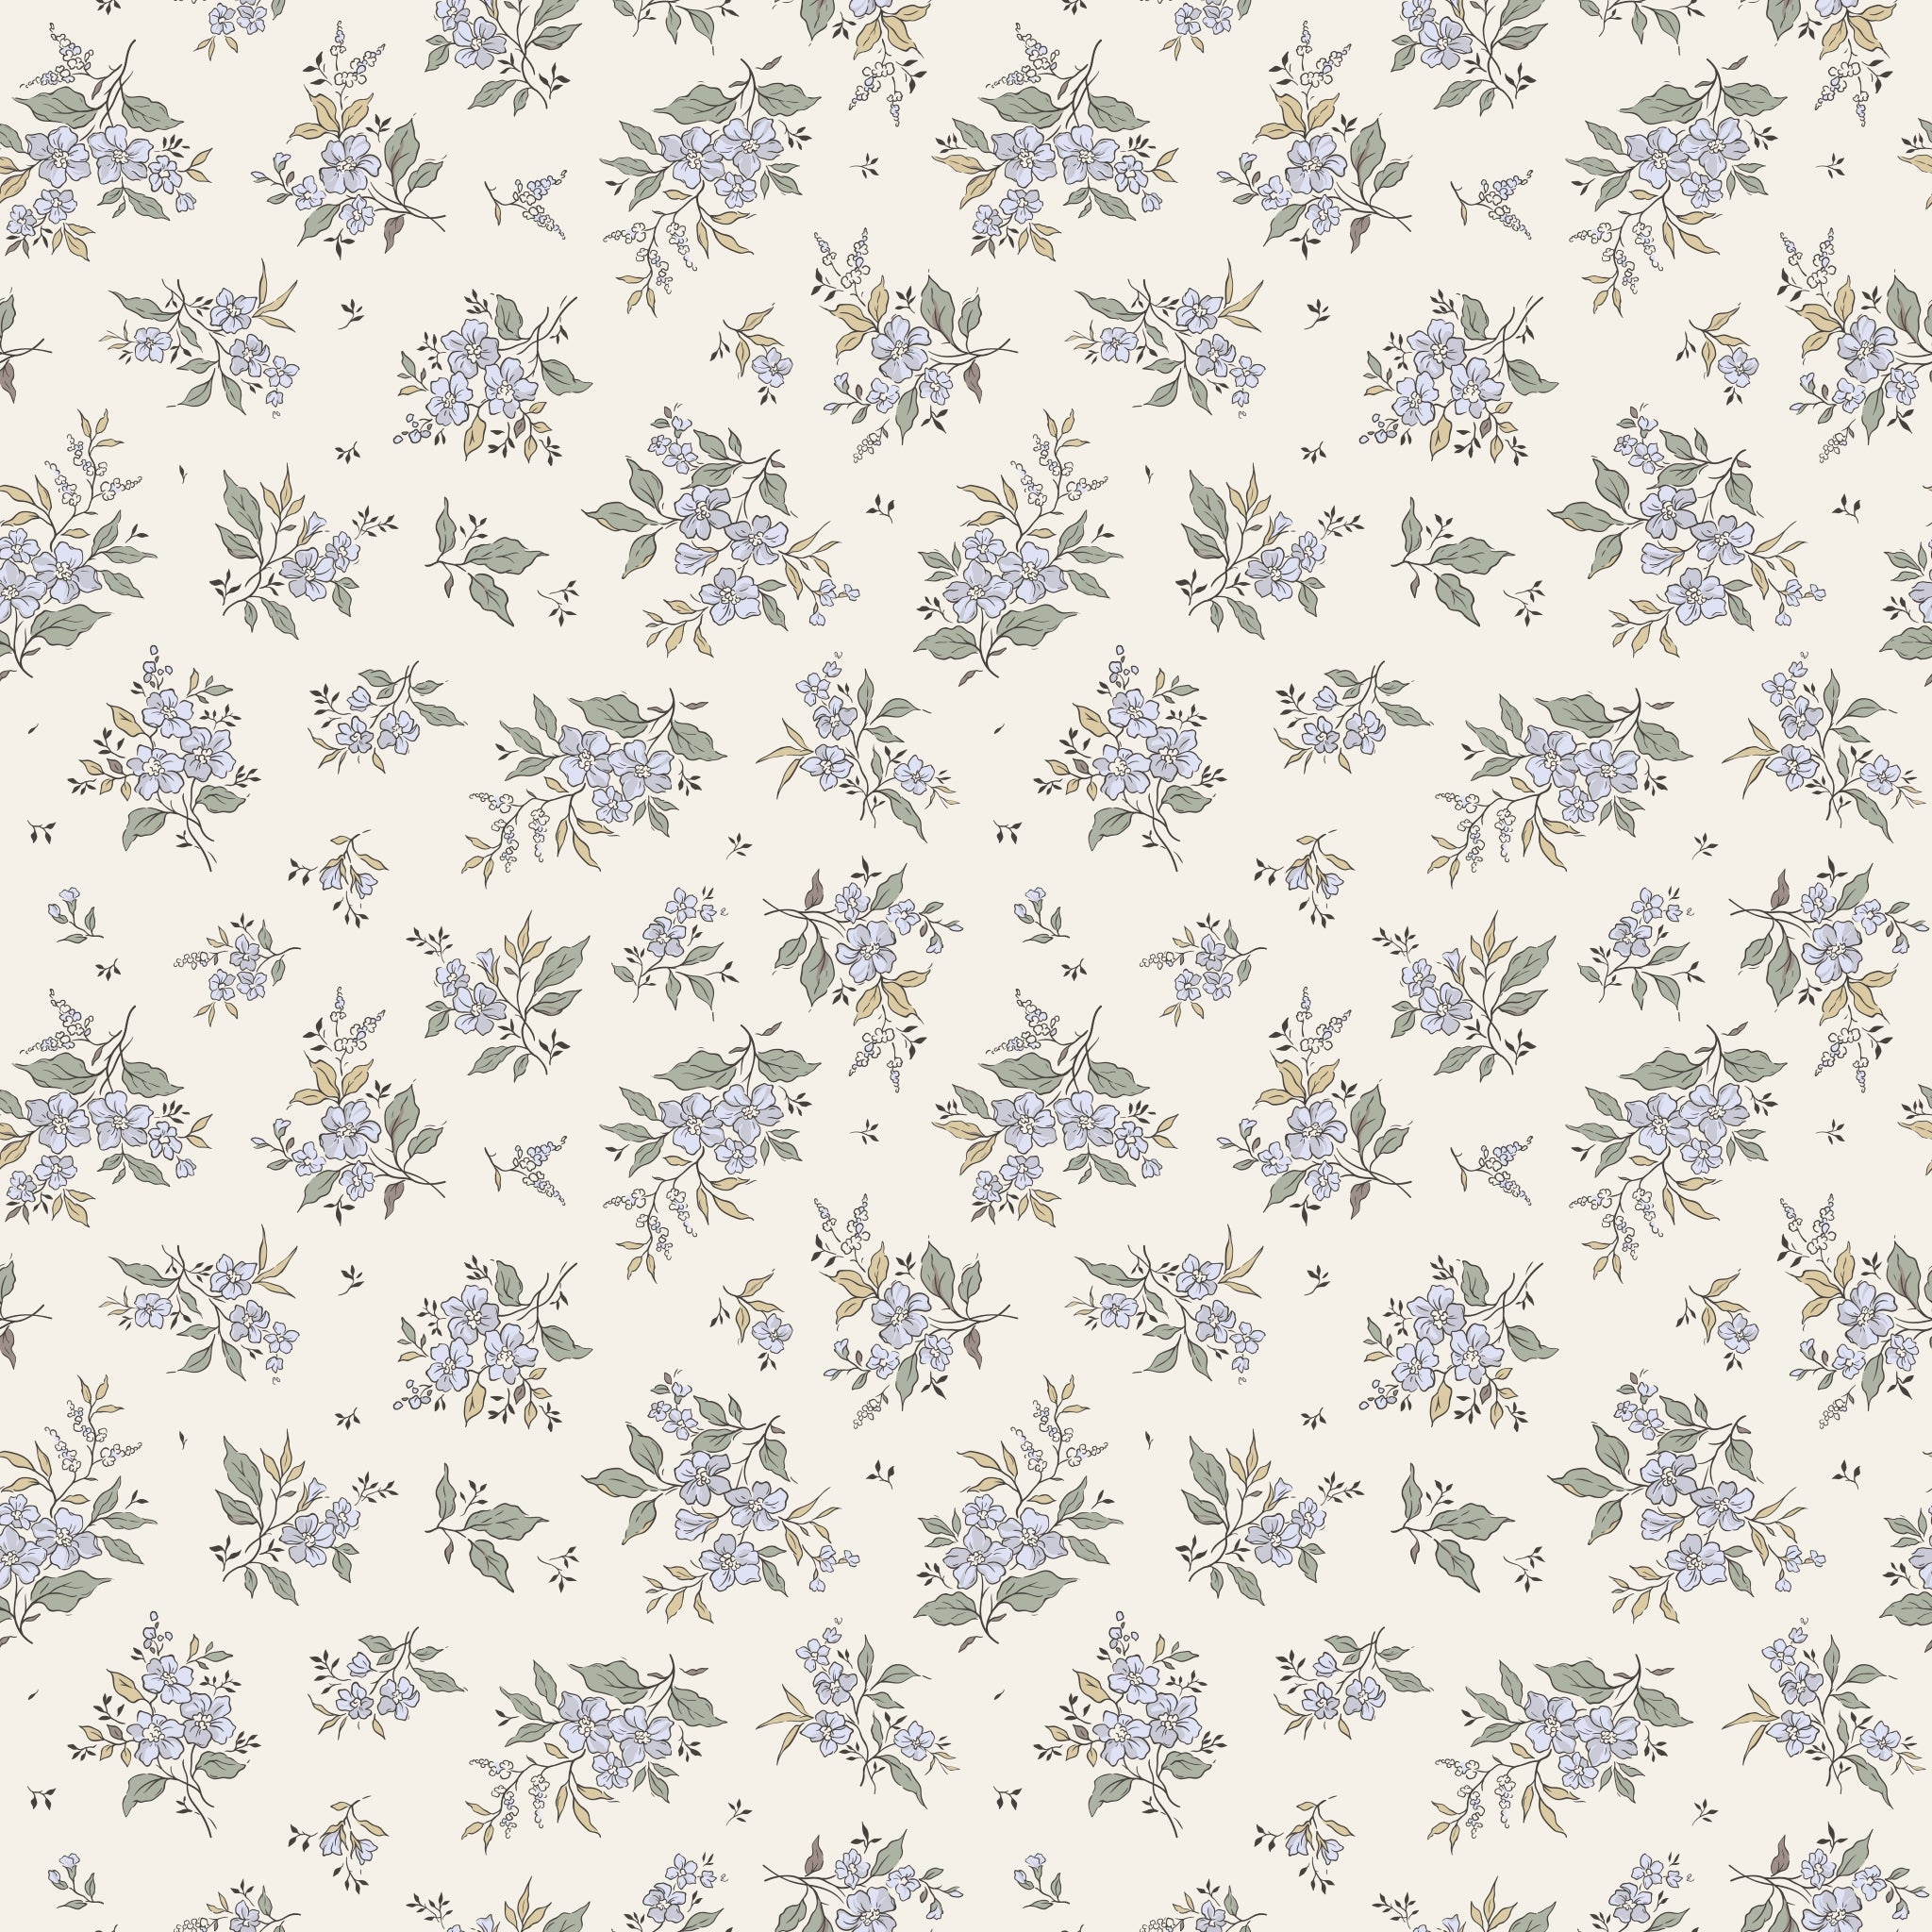 "Little Miss Wallpaper by Wall Blush showcasing floral design in a bedroom interior, highlighting elegant wall decor."